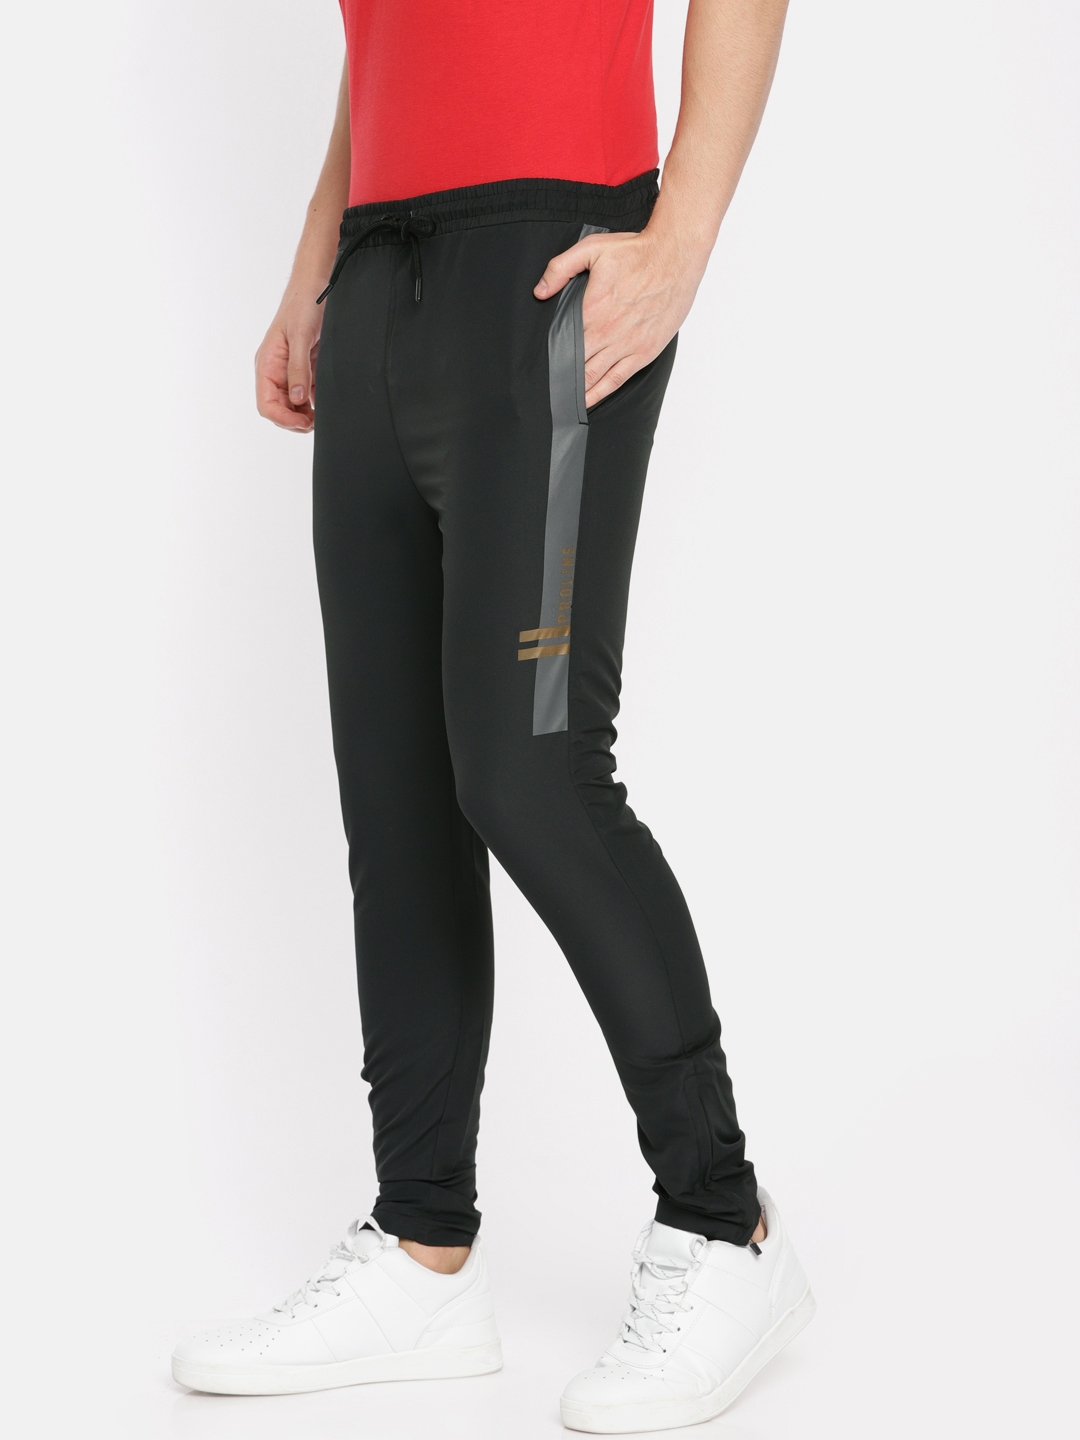 High Waist Ladies Cotton Grey Jeggings, Casual Wear, Slim Fit at Rs 200 in  Lucknow